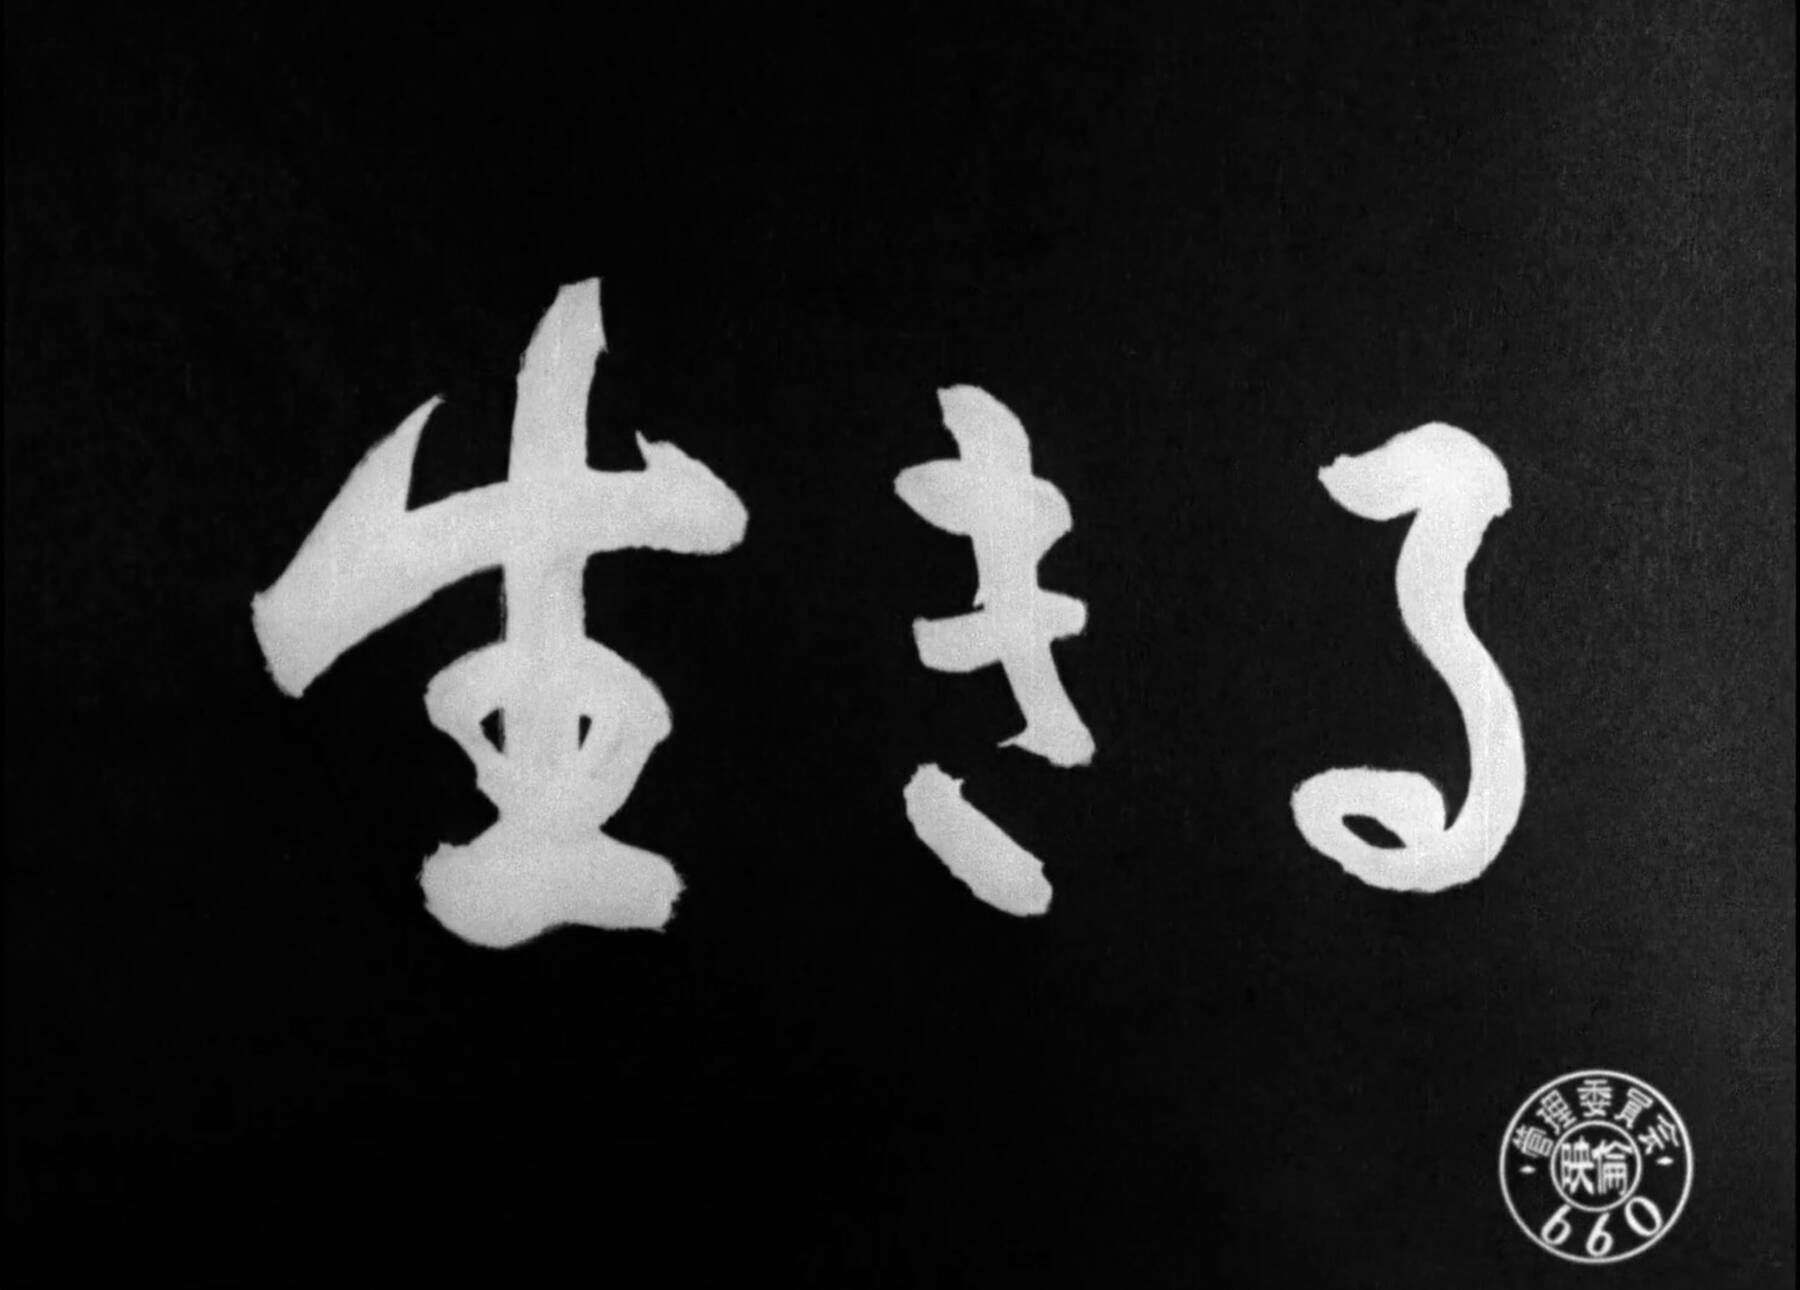 The title card for the film, Ikiru.